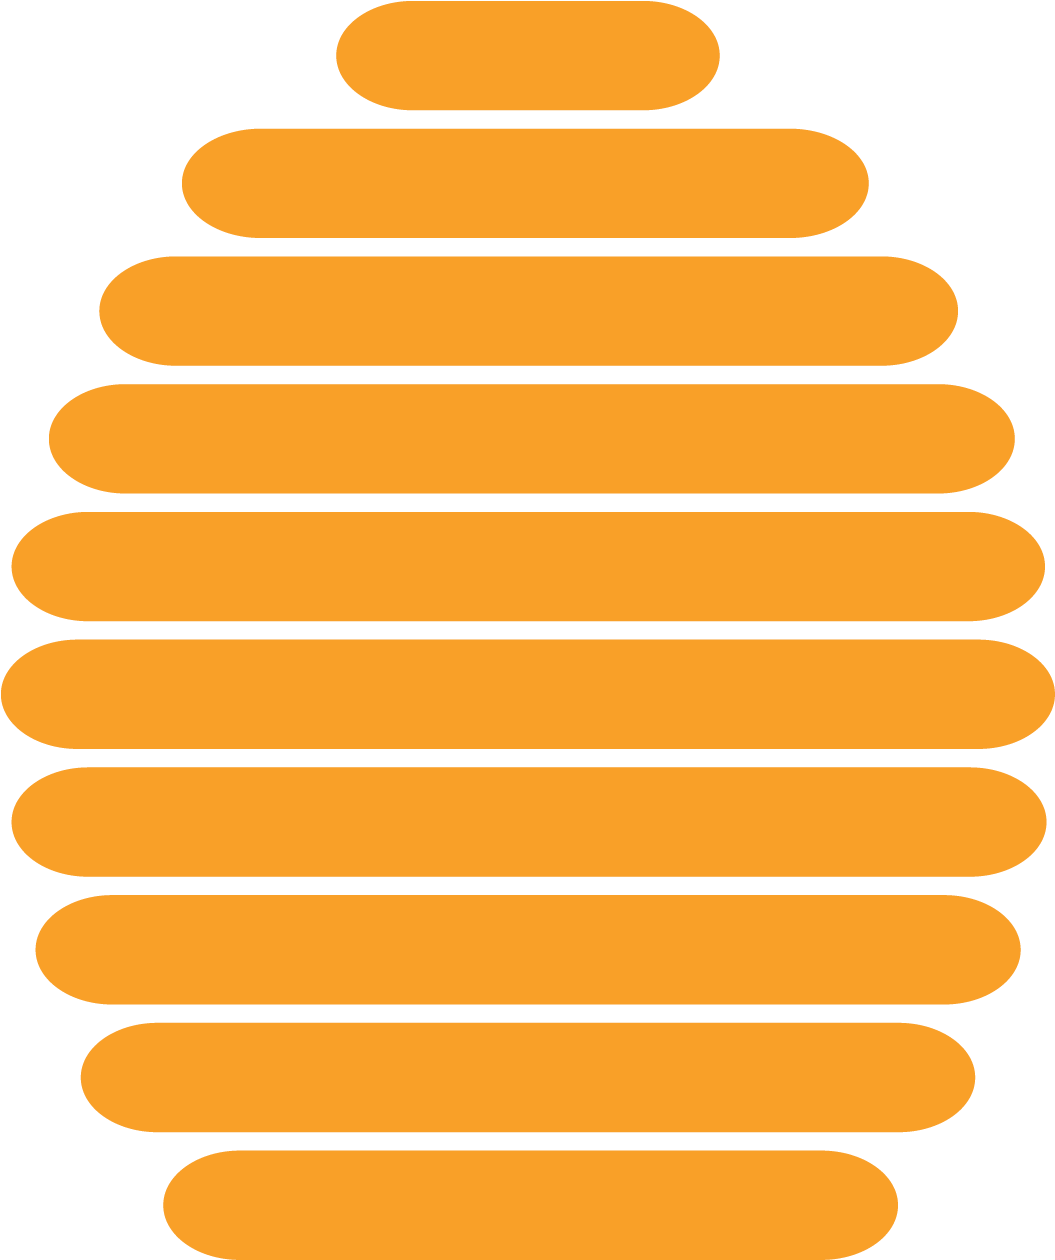 Beehive Homes National Conference - Beehive Homes Logo (1383x1342)